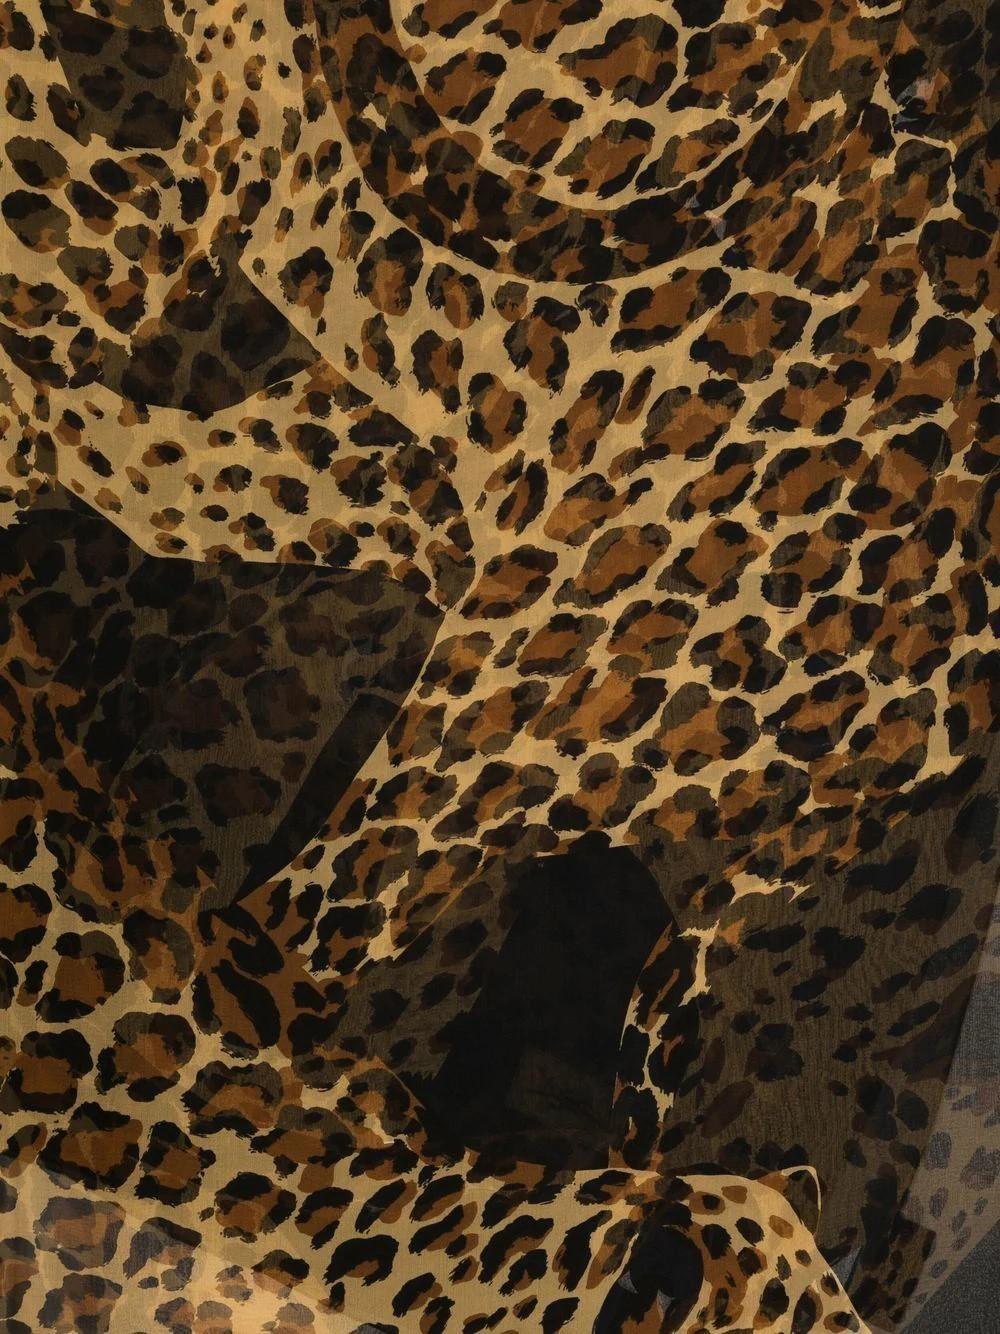 In a lovely slightly sheer silk, this leopard print Yves Saint Laurent scarf is sure to make a statement. Add an exotic touch to your YSL bag handle or with an all-black Parisian look. Features a small YSL logo at the top corner, large in size.
